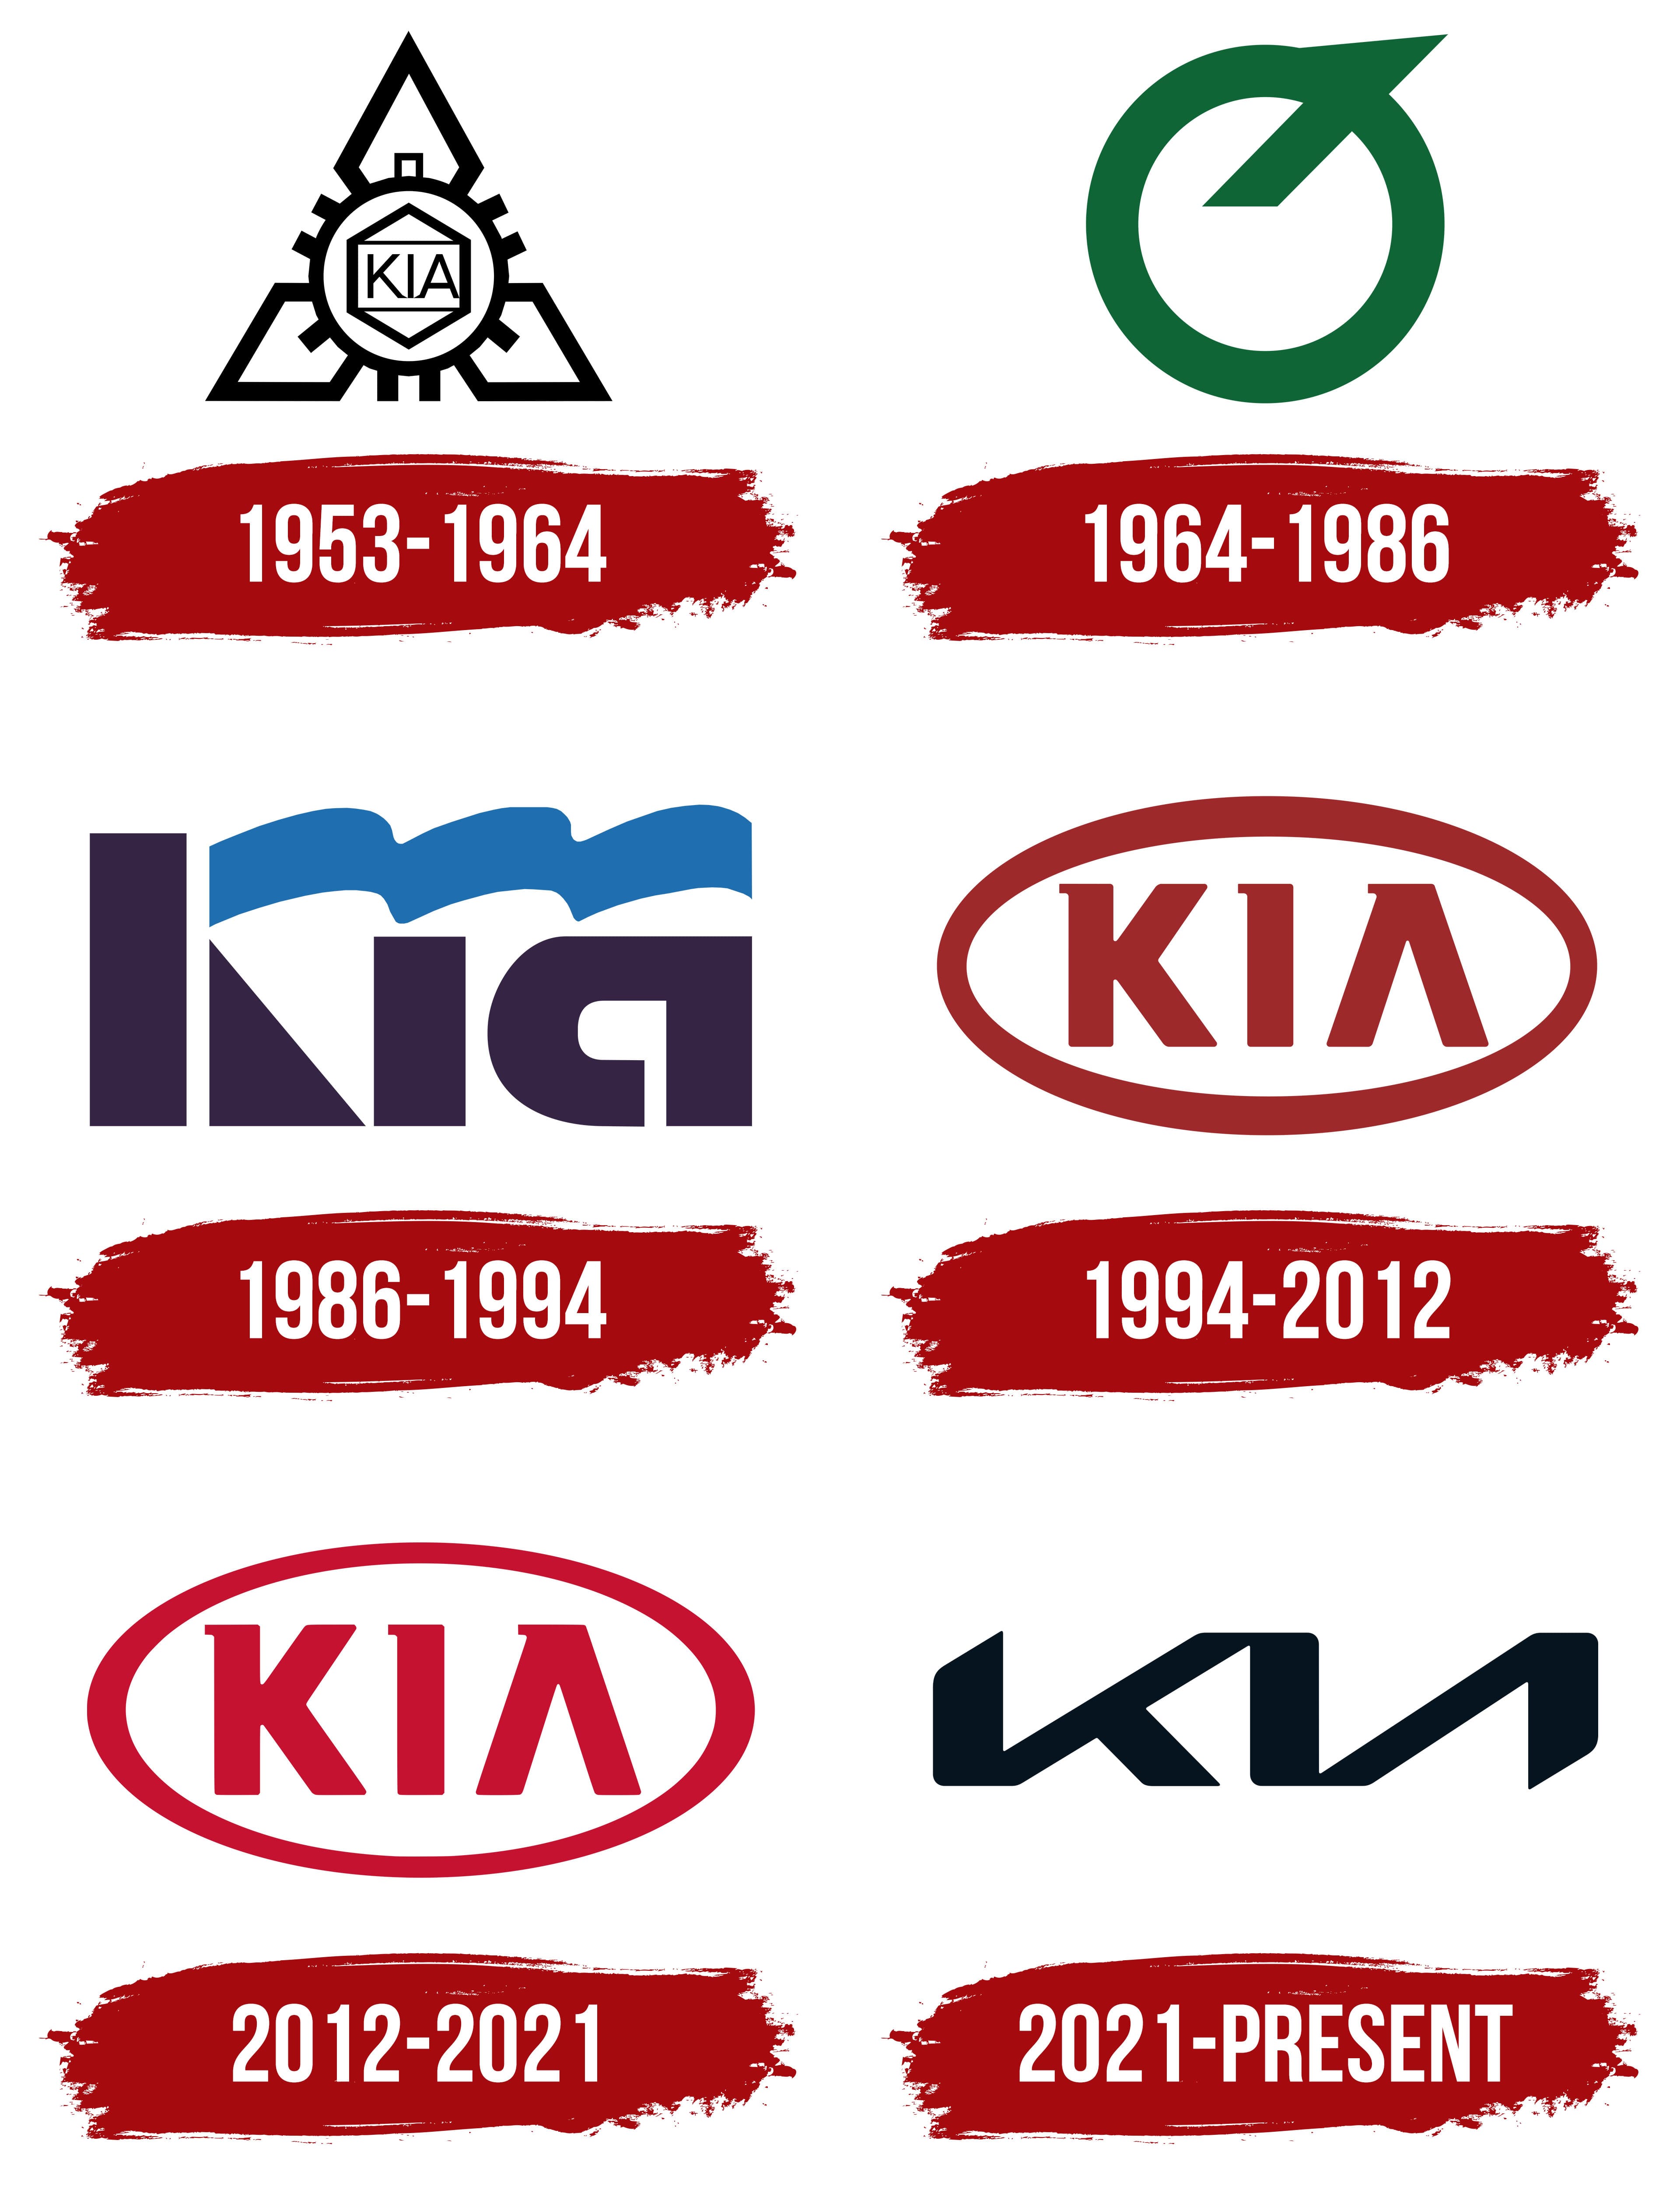 gaphic with past Kia logos from 1953-1964, 1964-1986, 1986-1994, 1994-2012, 2012-2021, then 2021 to present day